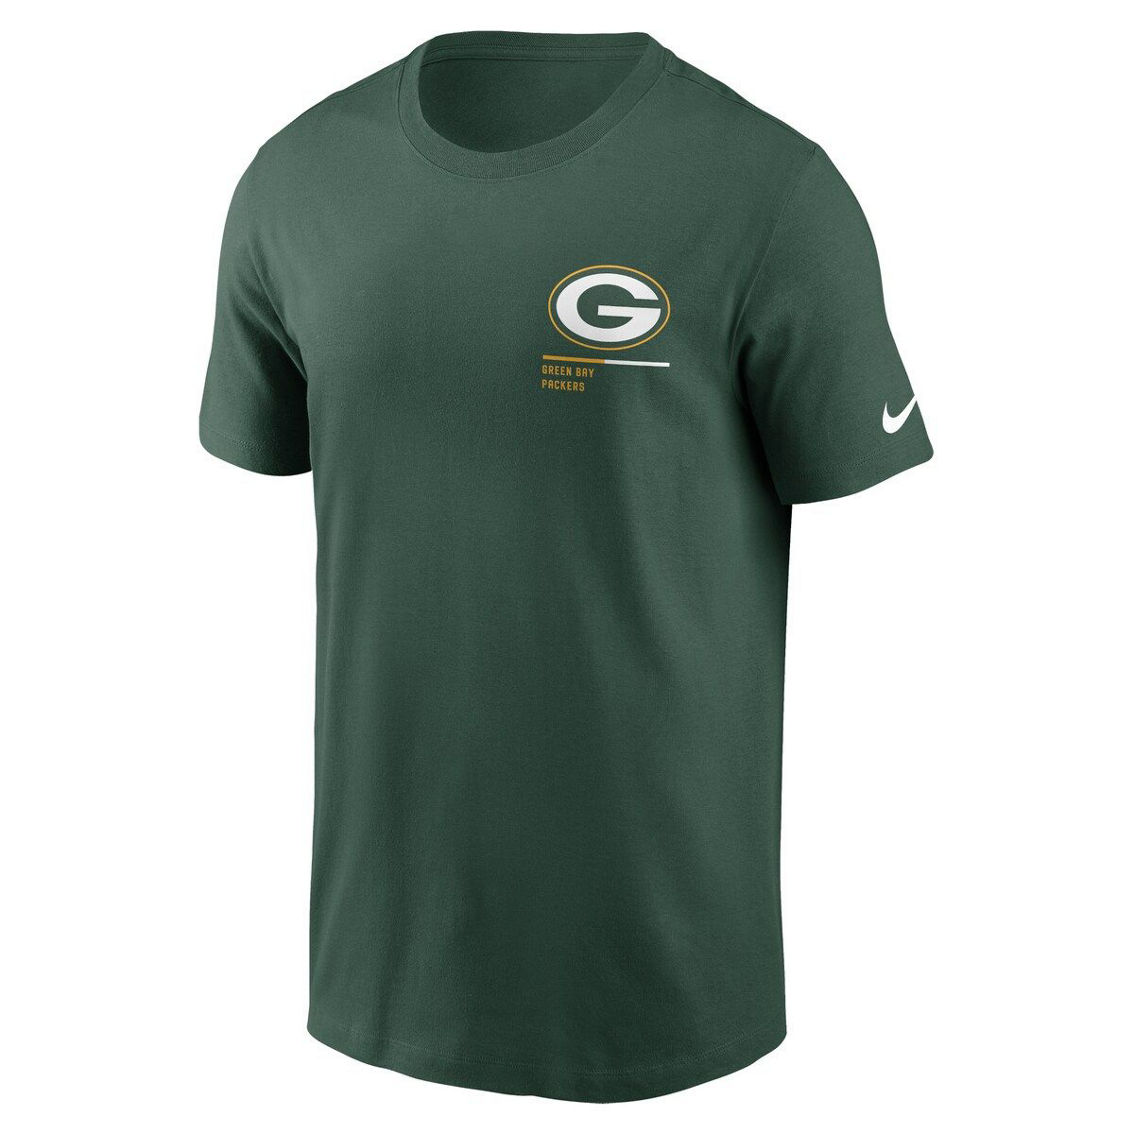 Nike Men's Green Green Bay Packers Team Incline T-Shirt - Image 3 of 4